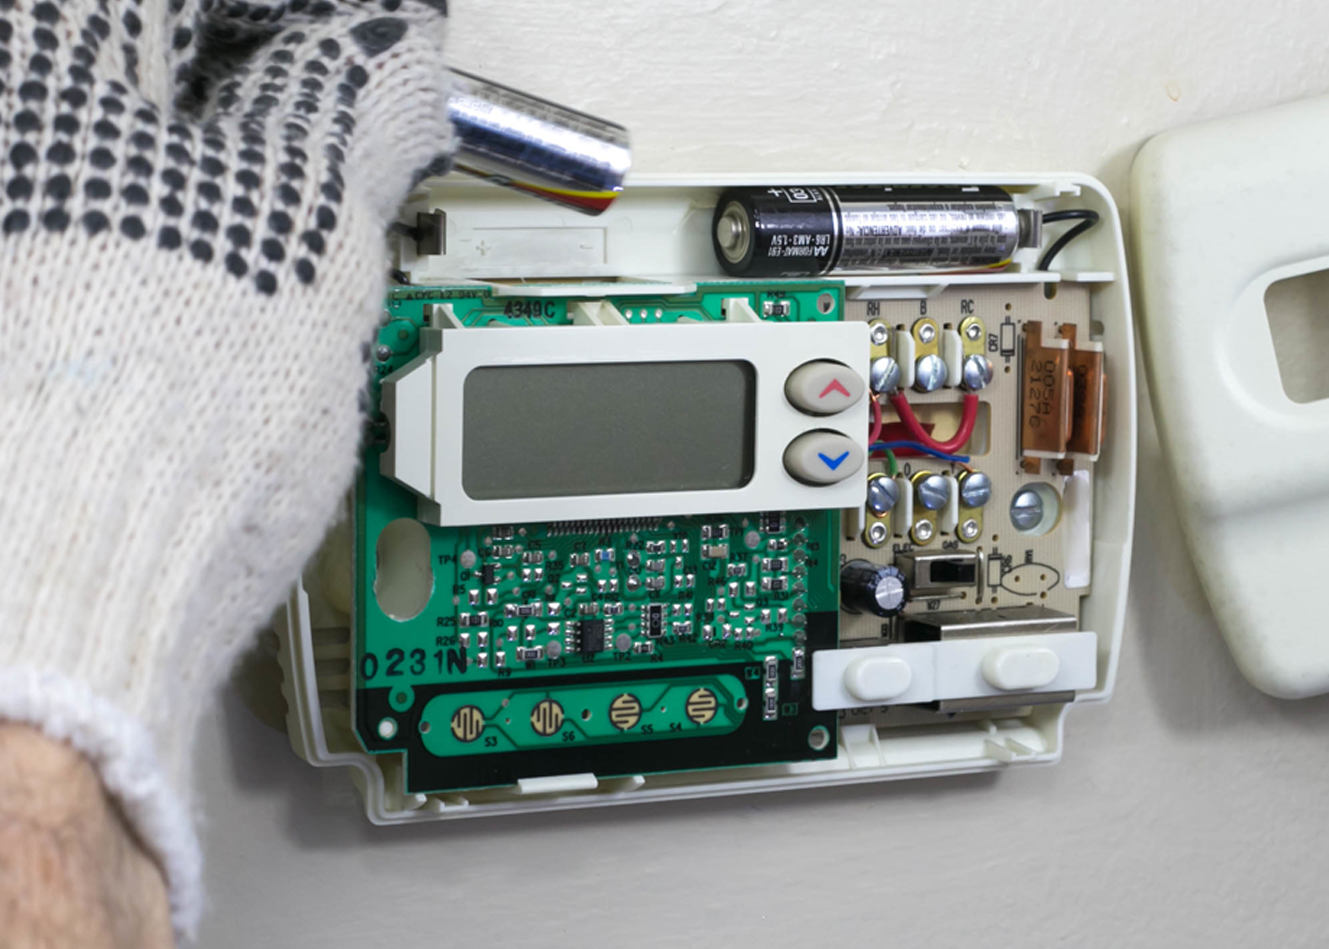 How to Change Thermostat Batteries